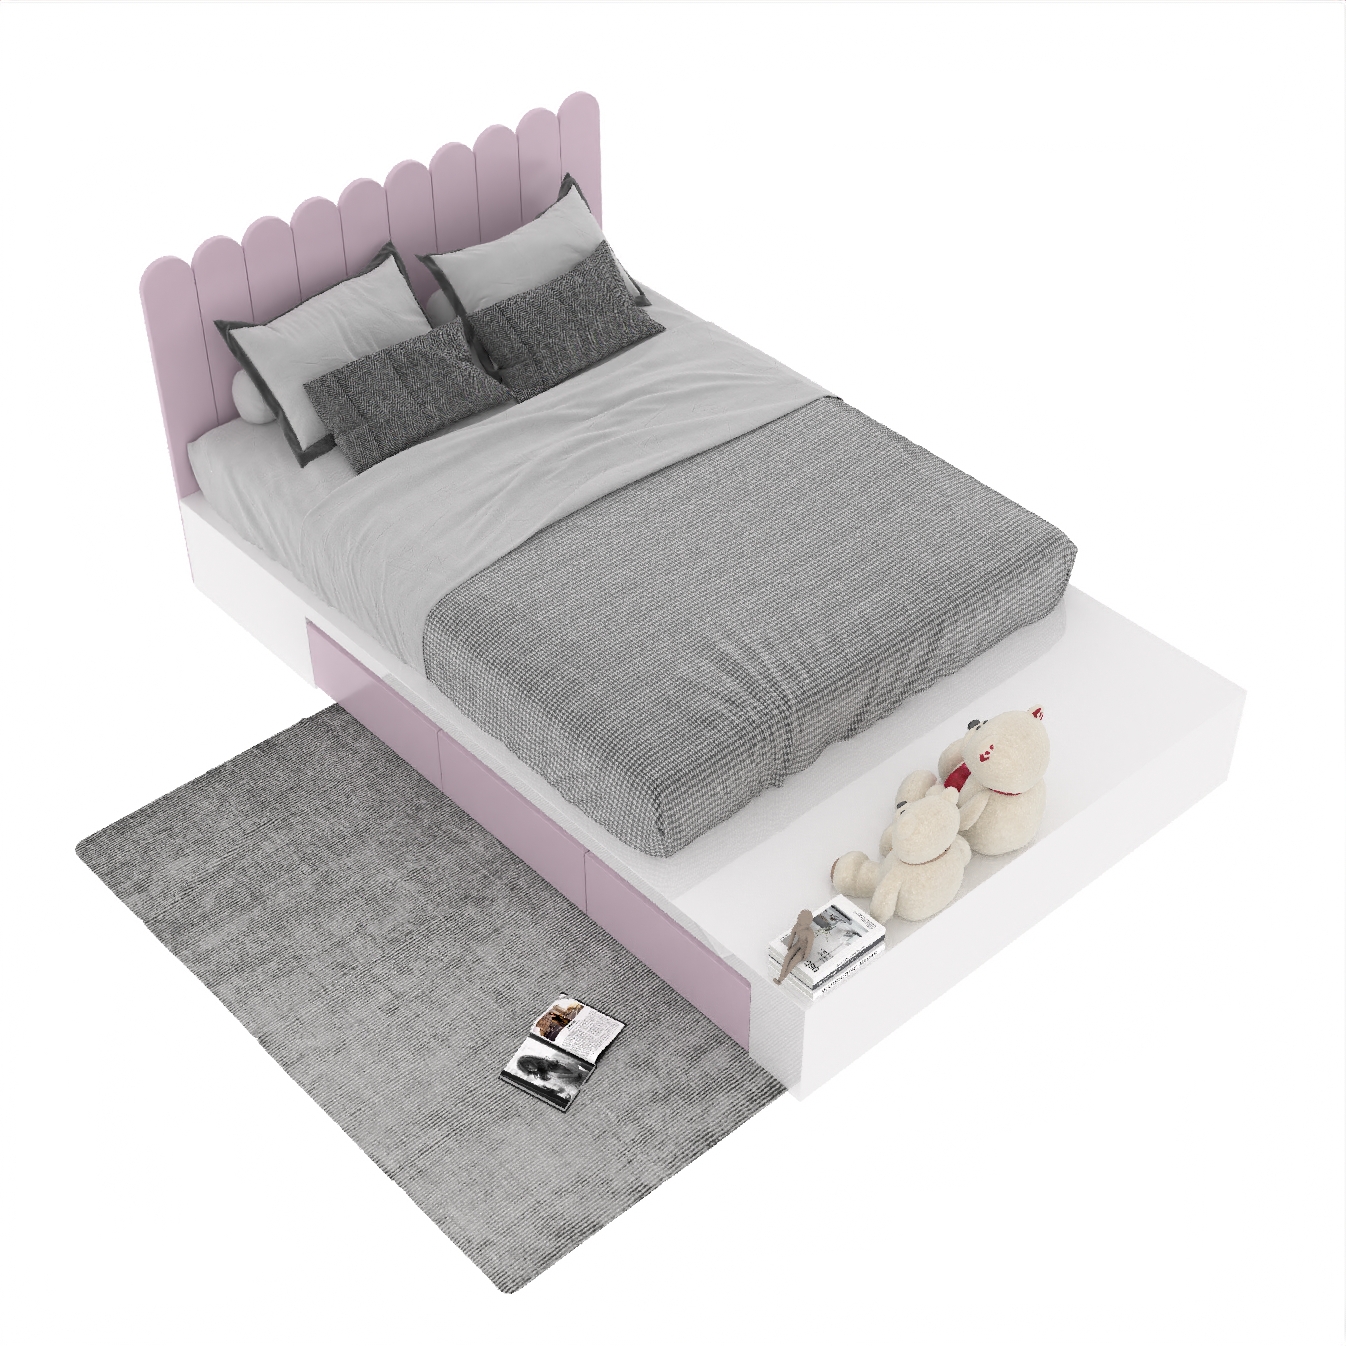 10527. Download Free Bed Model By Nguyen Huu Cong